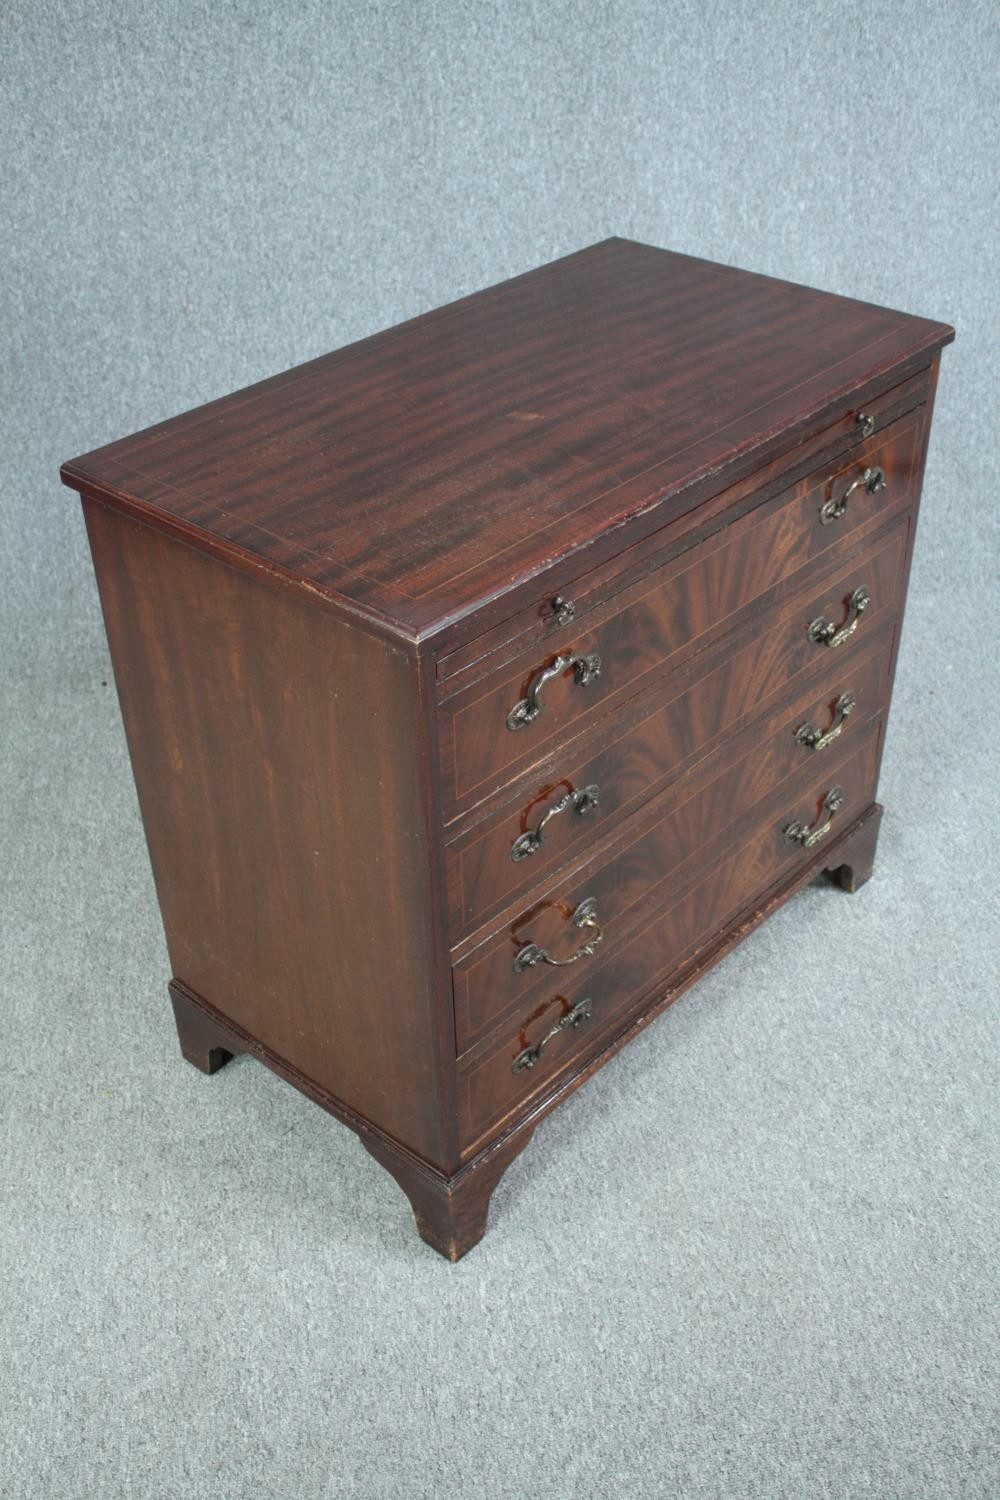 Chest of drawers, Georgian style mahogany. H.80 W.85 D.48cm. - Image 4 of 6